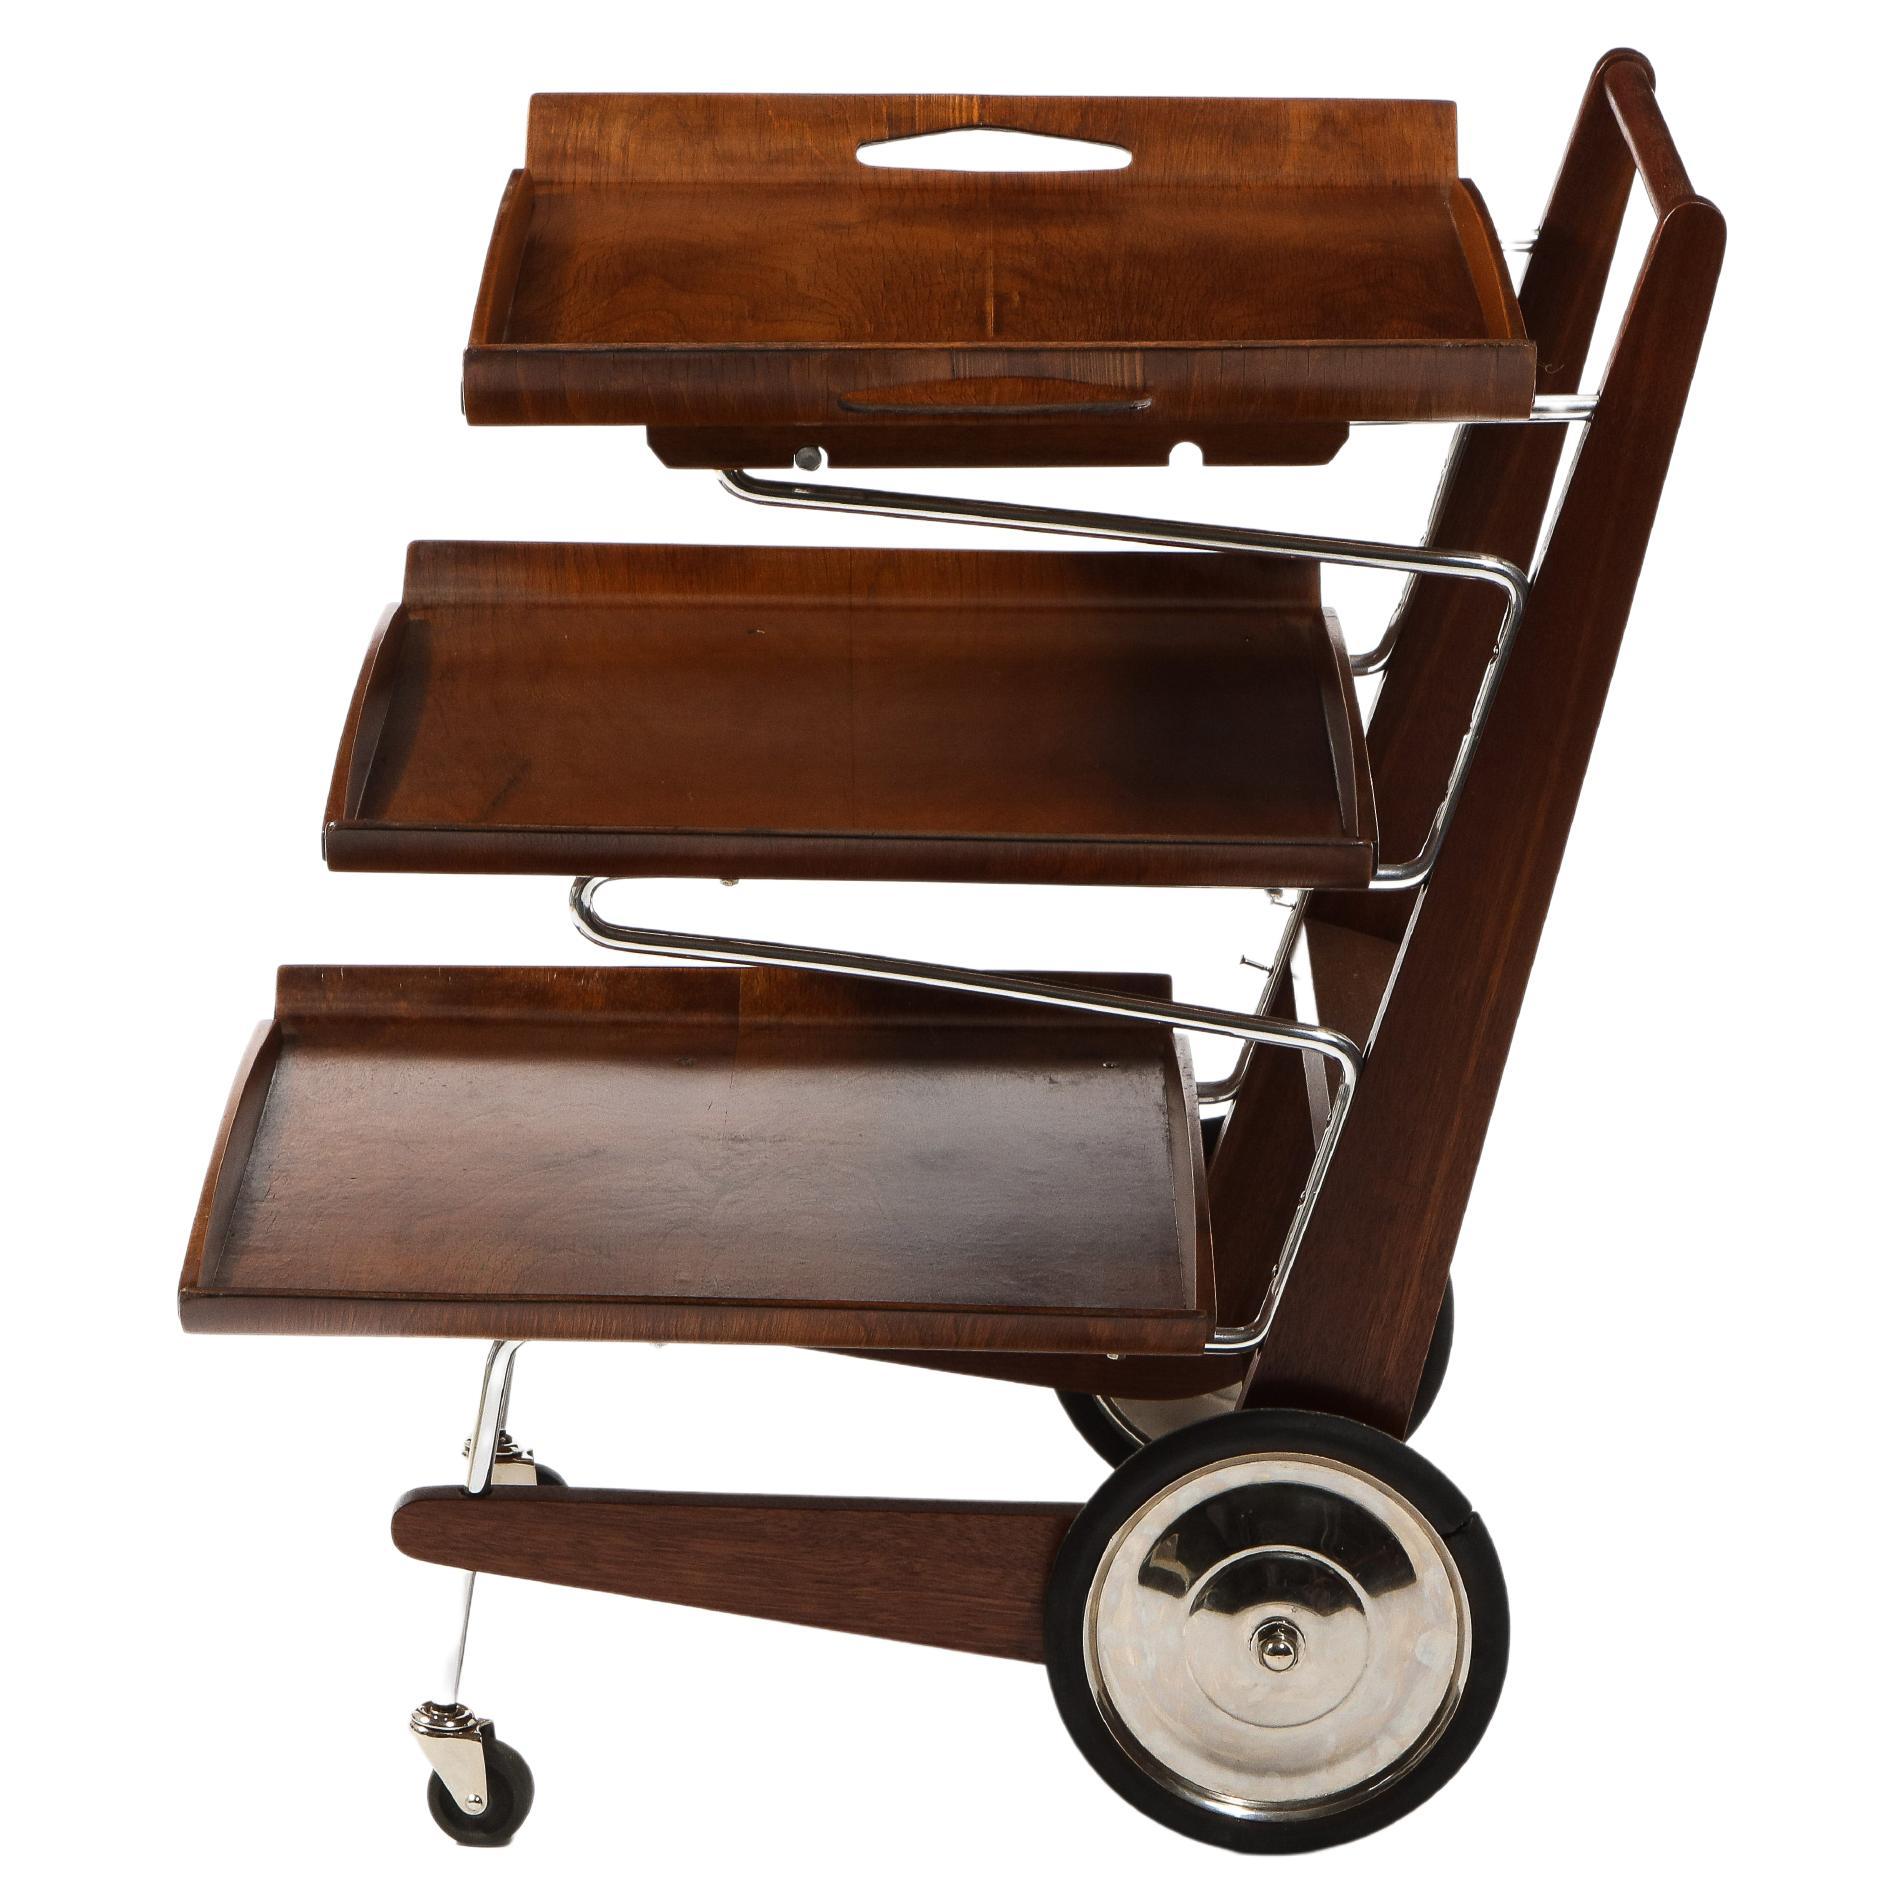 Modernist Tiered Magazine Rack on Wheels or Bar Cart, USA 1950's For Sale